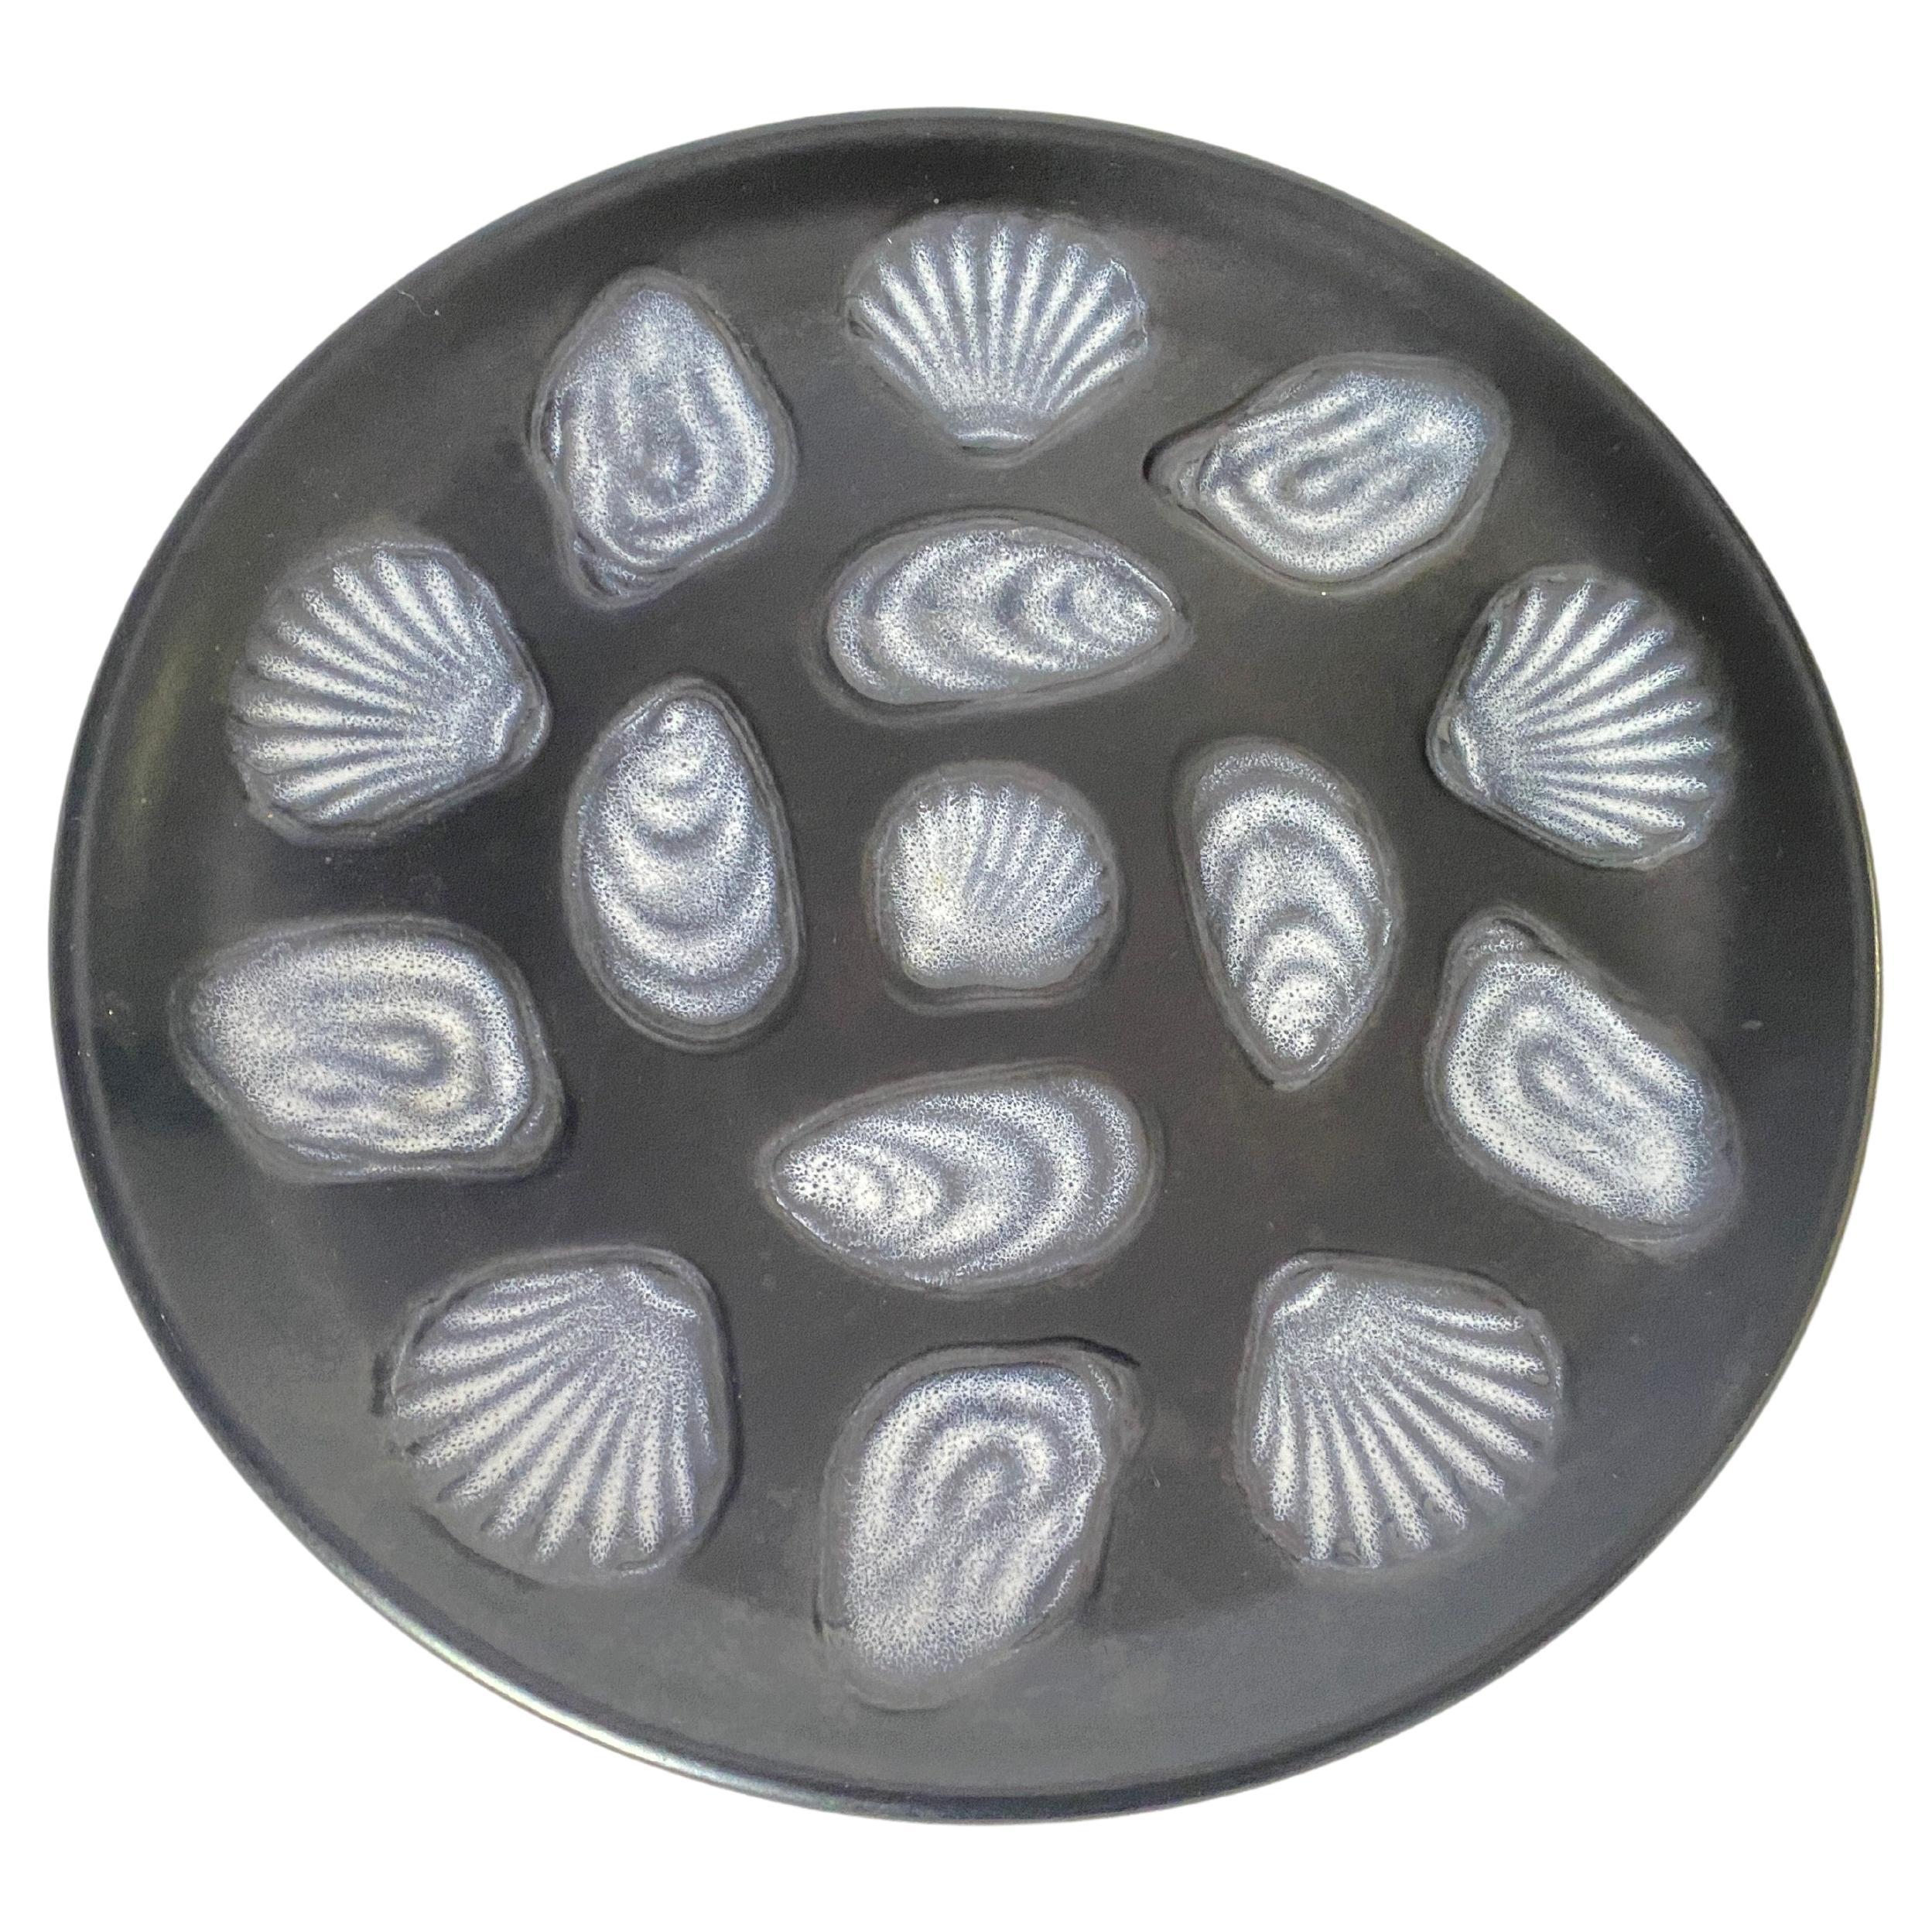 Oyster plate in Cramic, in black white and brown color. Large.
France, 1960.